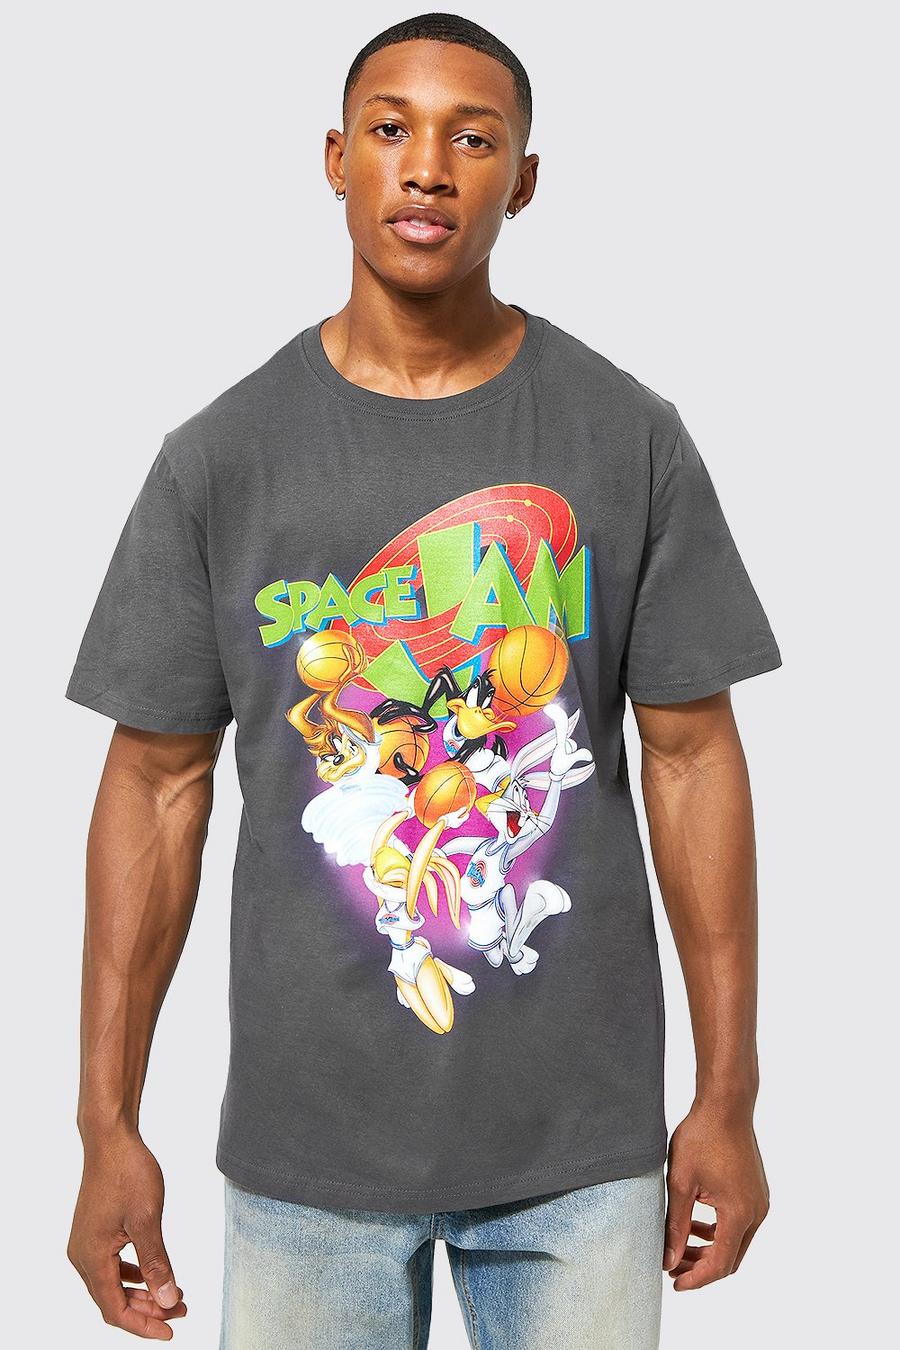 Charcoal grey Oversized Space Jam License T-shirt